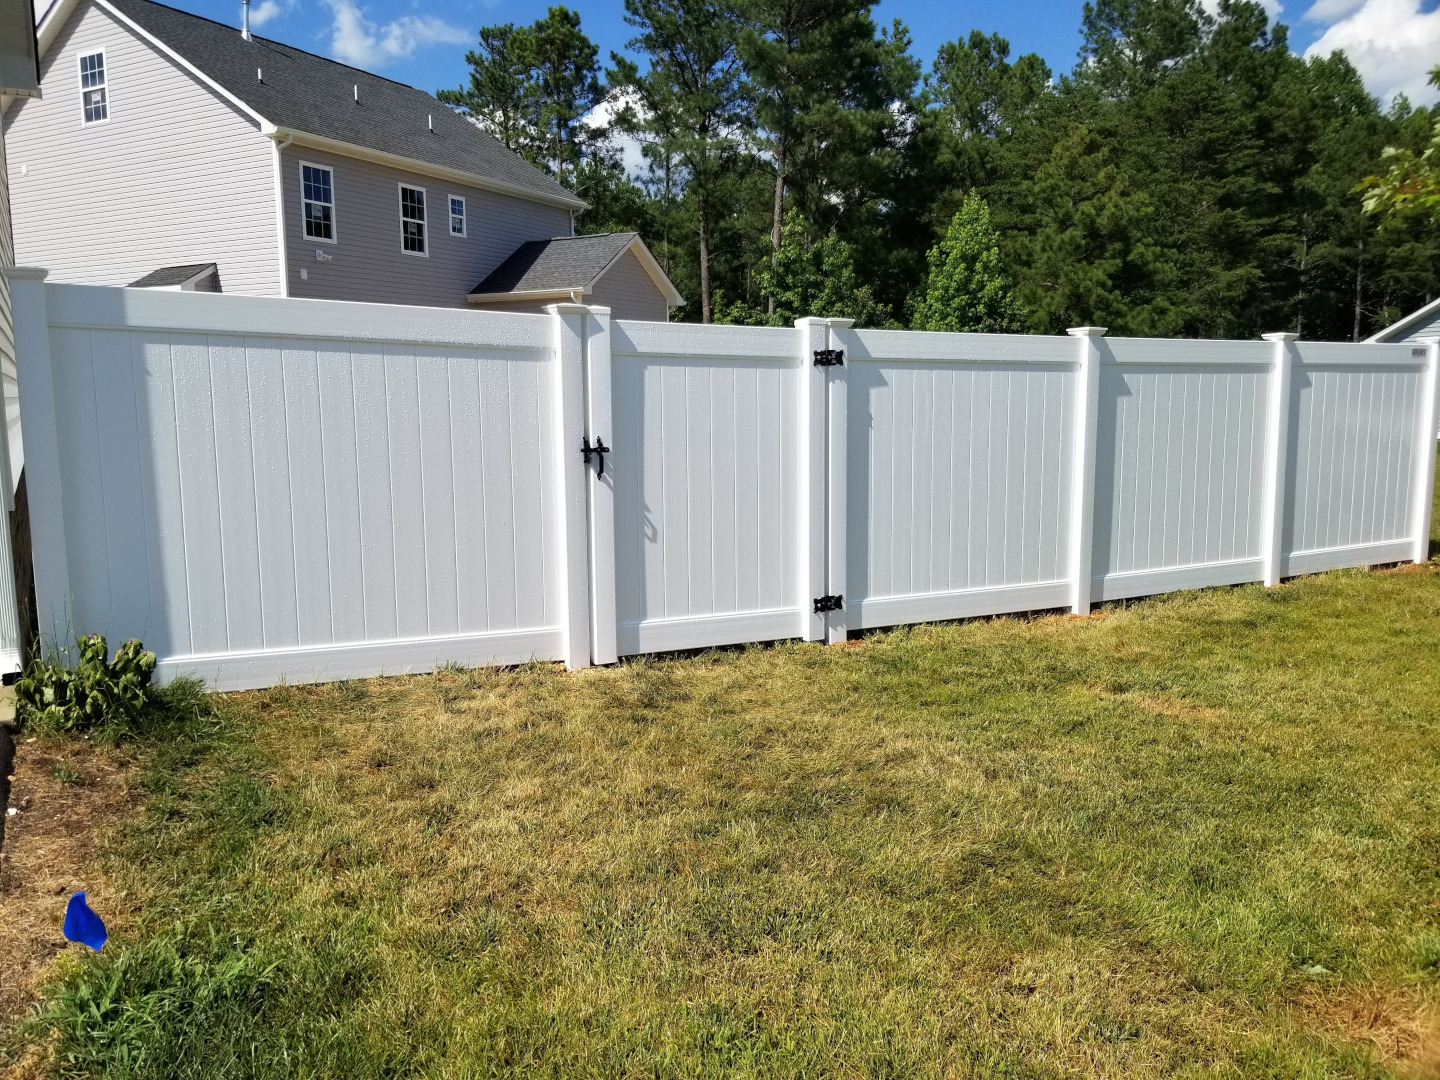 Six foot high white vinyl tongue and groove privacy fence with New England post caps.